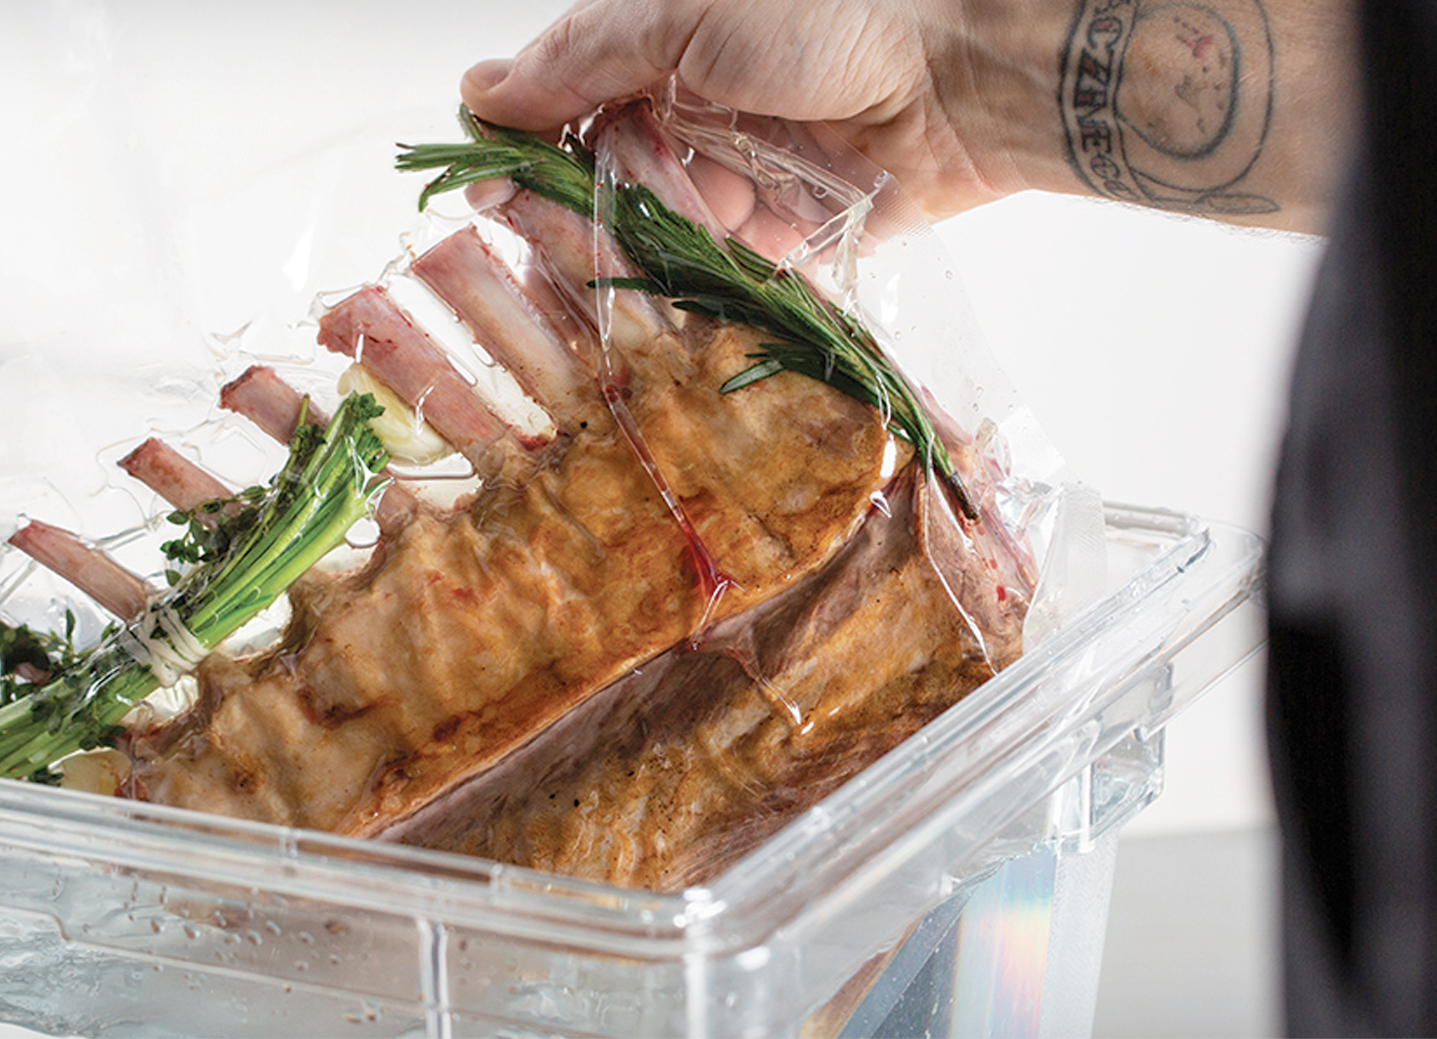 What Are the Advantages of Sous Vide Cooking?